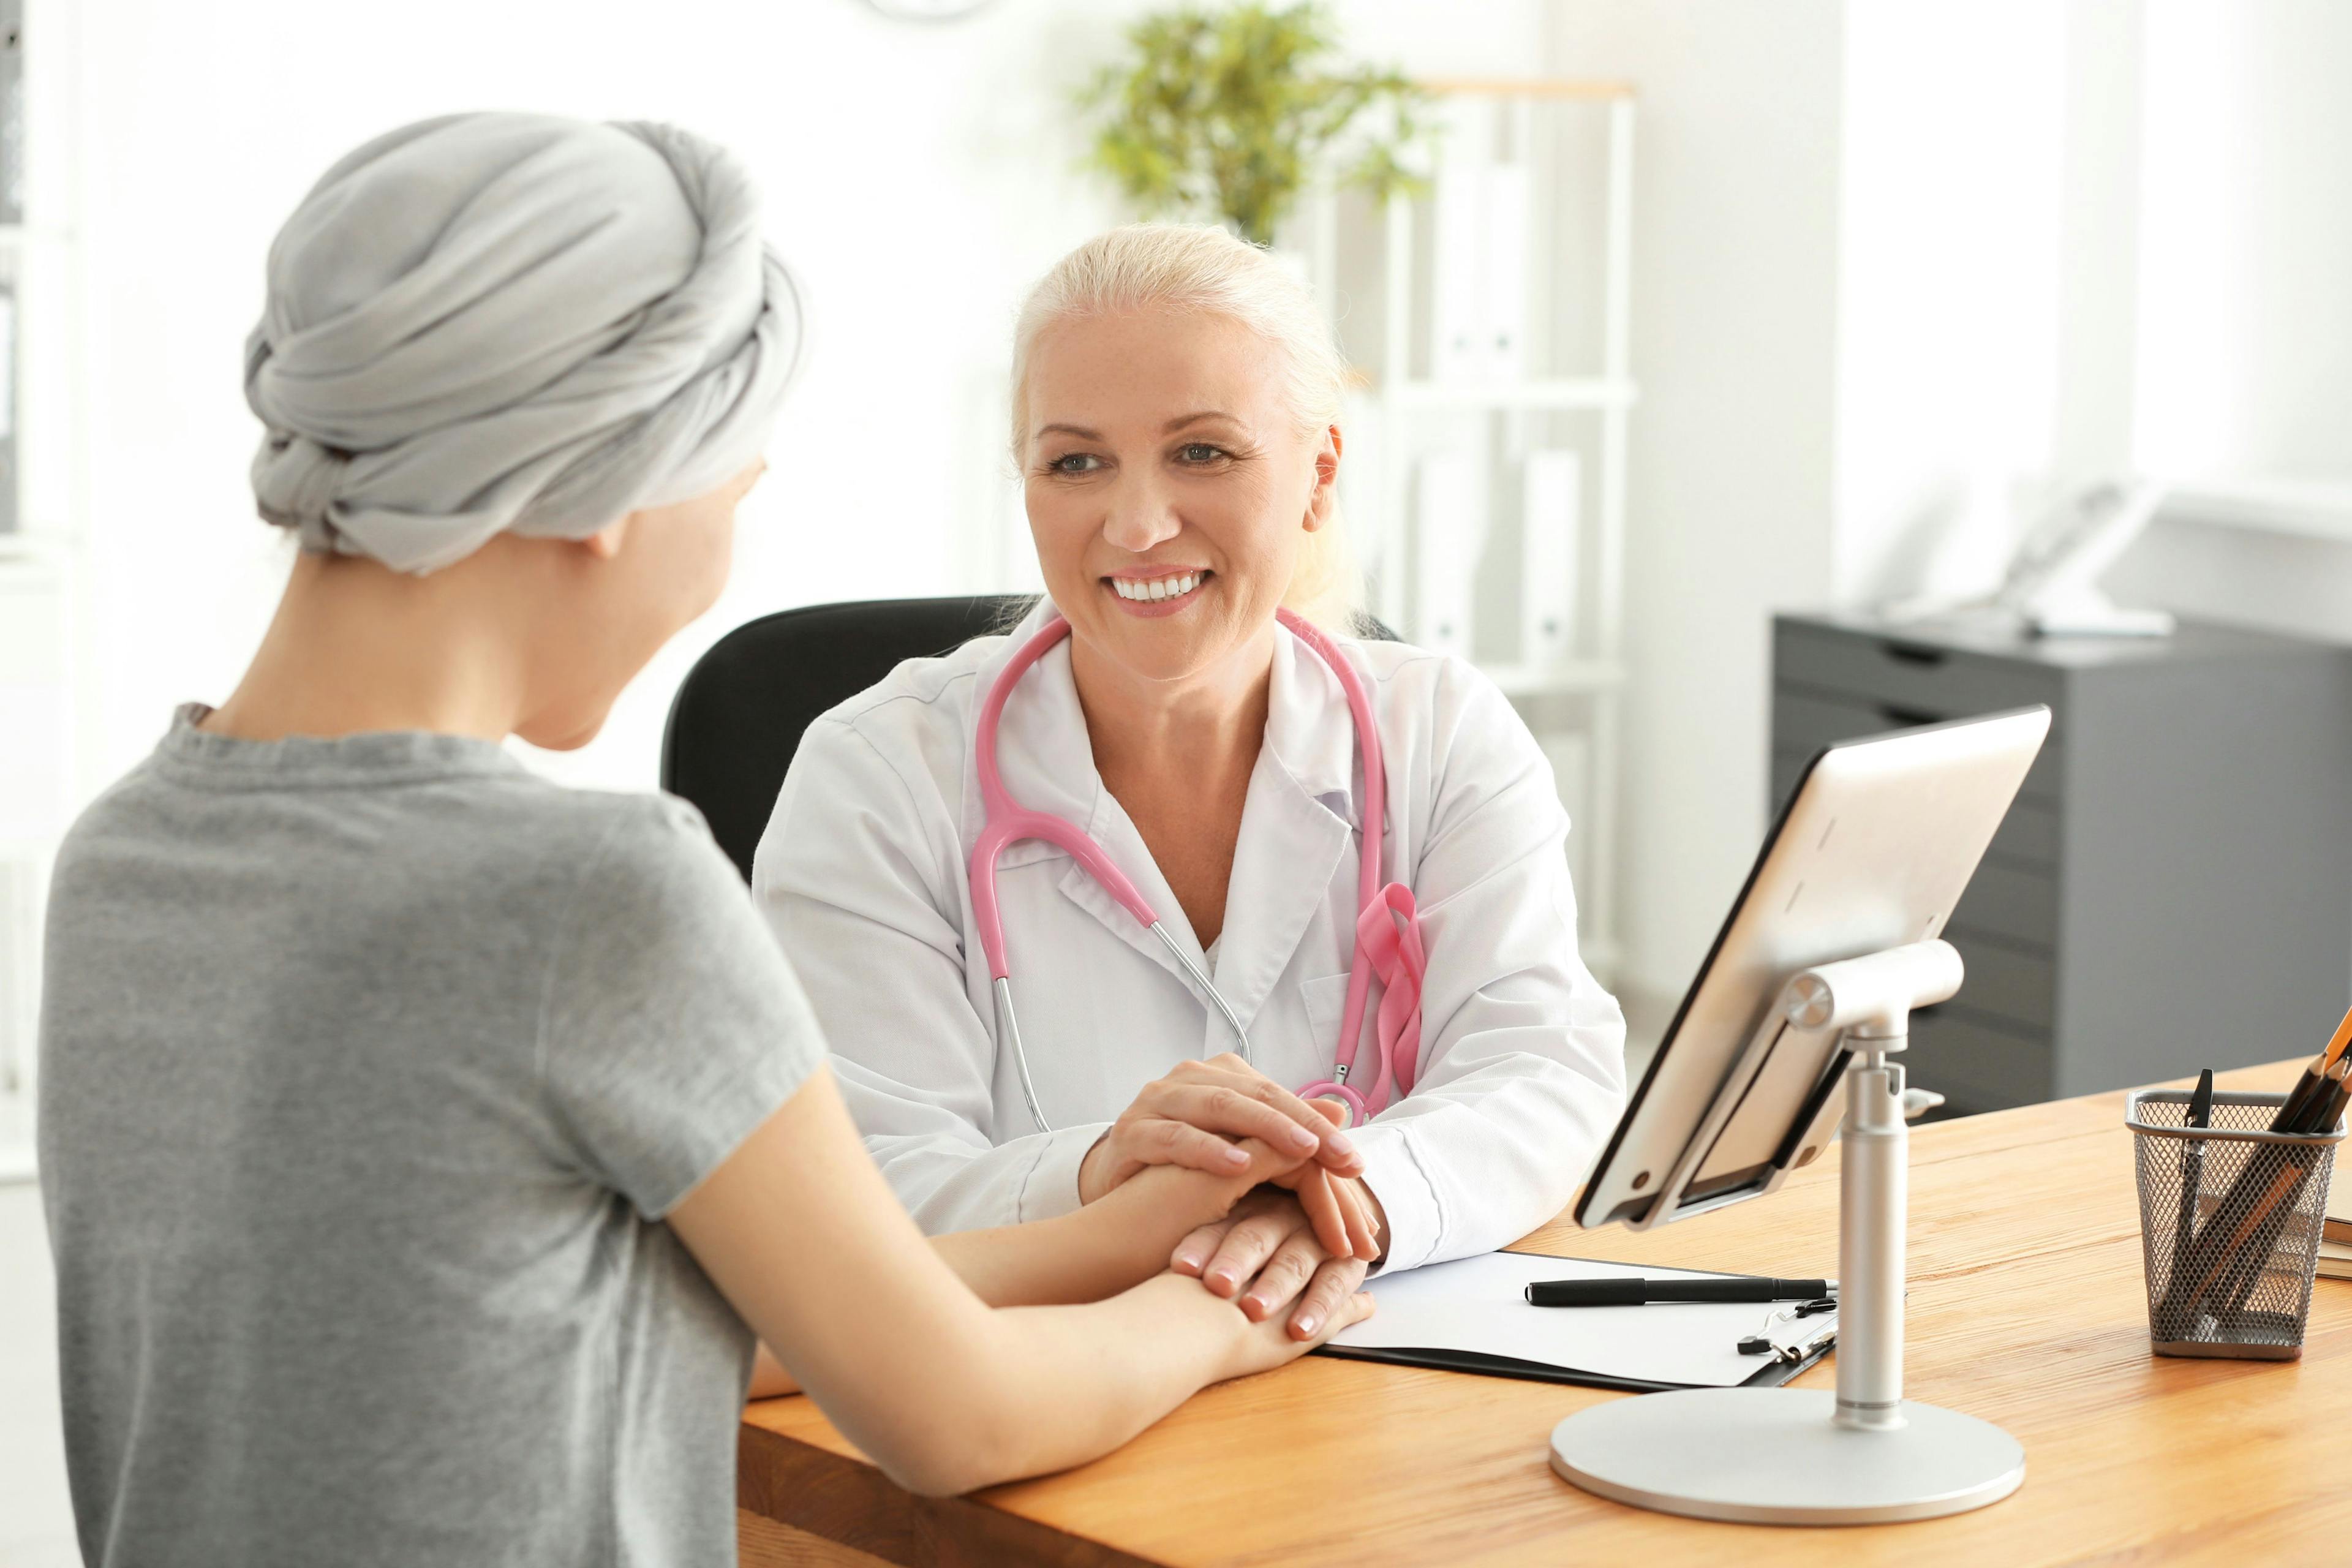 Only about half of all breast cancer survivors seek gynecological care